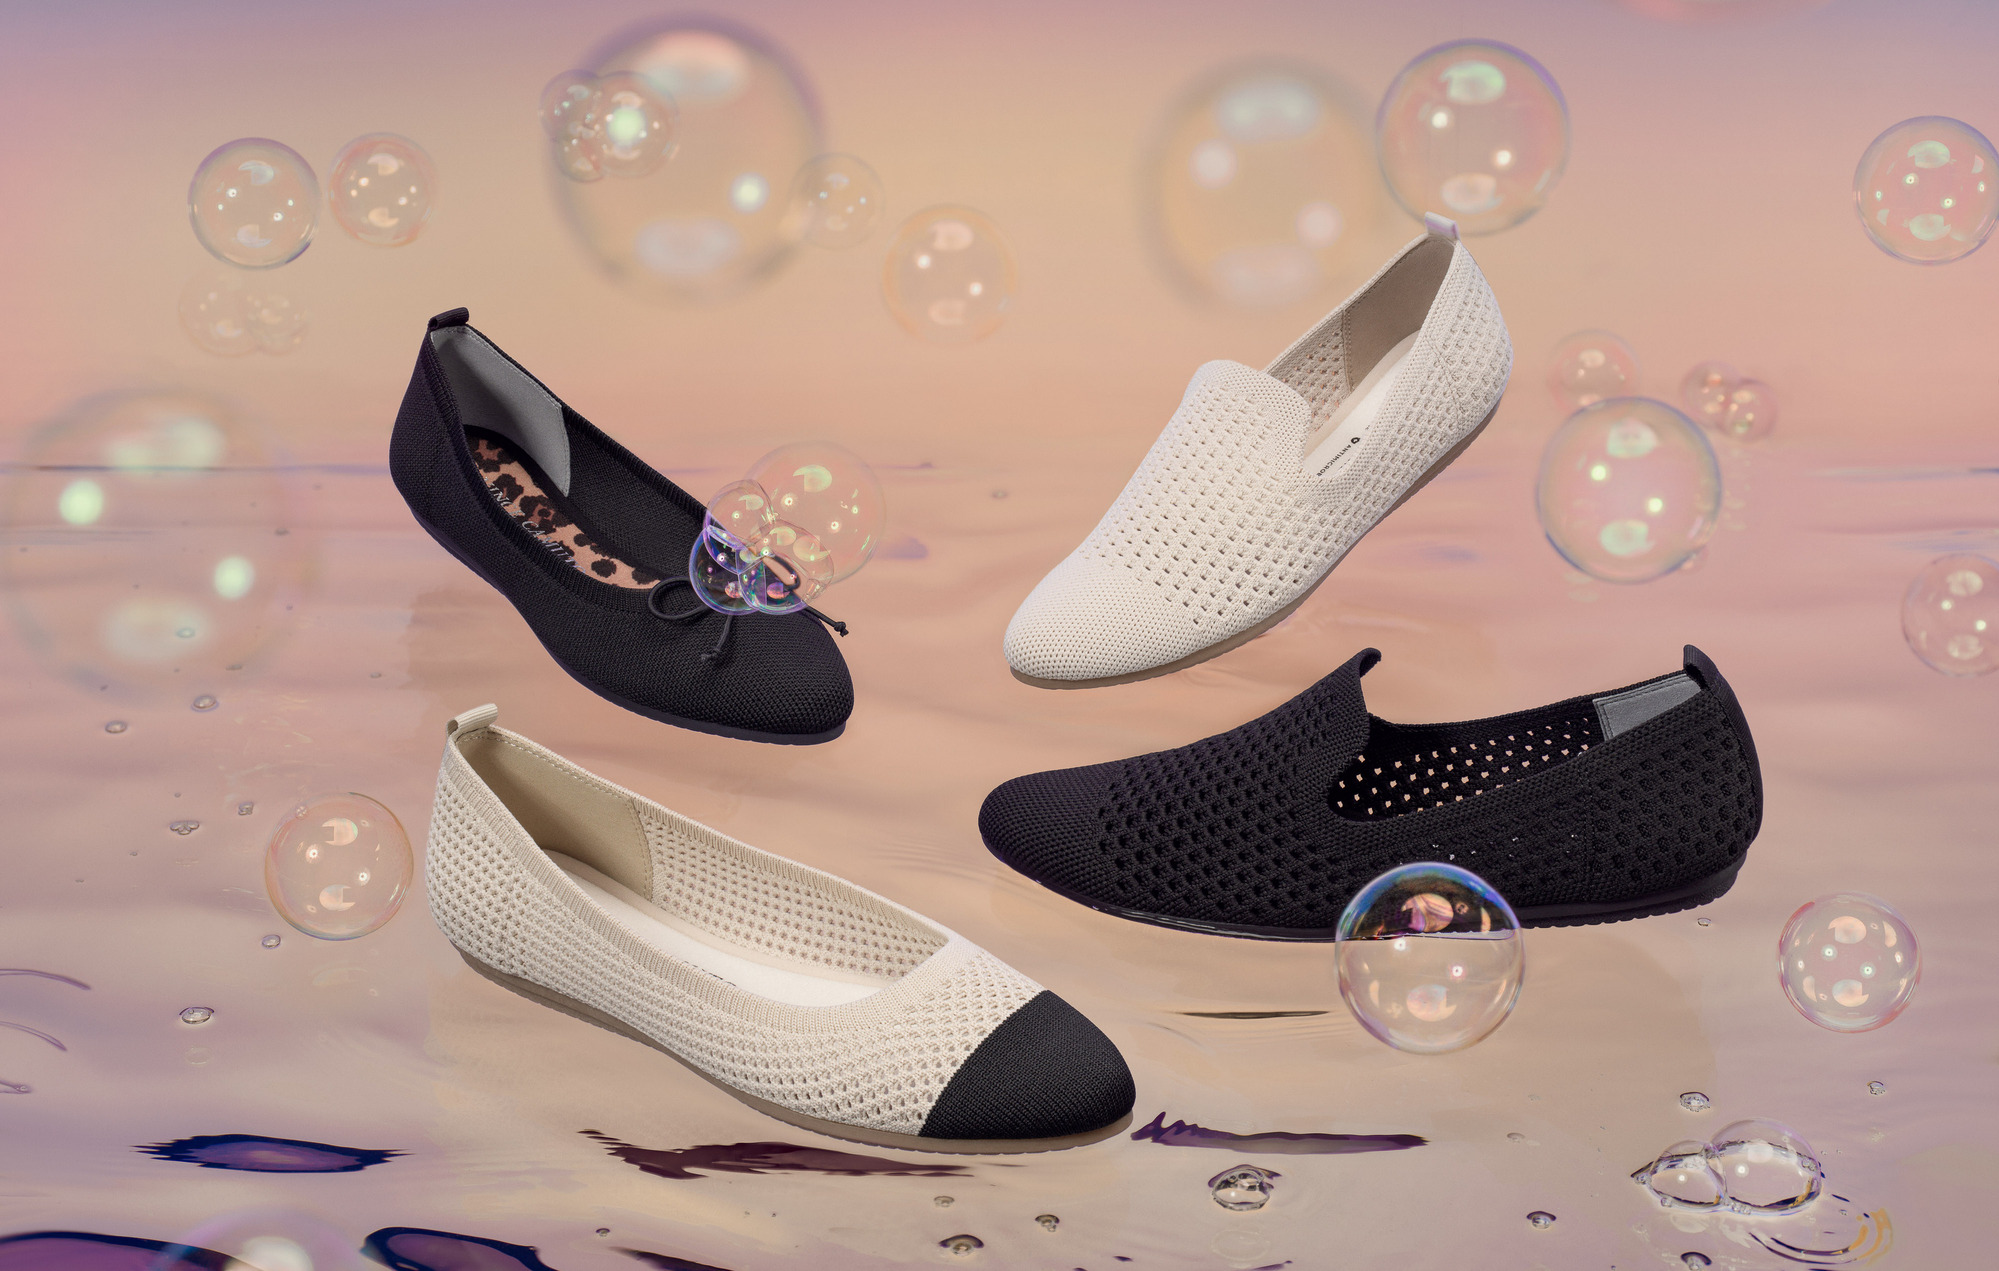 Commercial and advertising product photography for Vince Camuto washable footwear and accessories by Los Angeles photographer Timothy Hogan